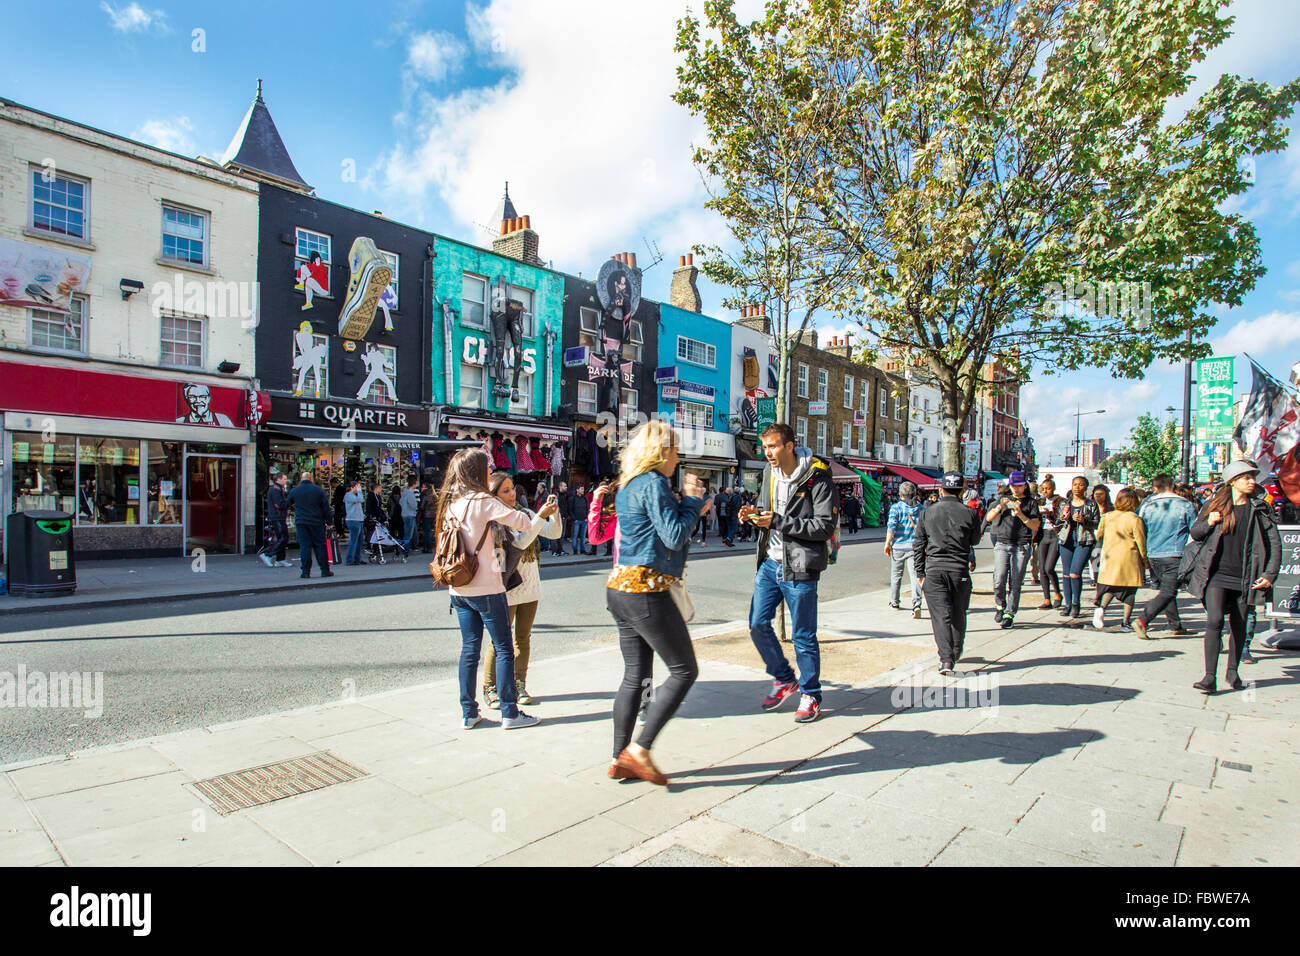 LONDON, UK - OCTOBER 10, 2014: Pictured here is a street view of historic Camden Town at the Stables with visitors visible. Stock Photo